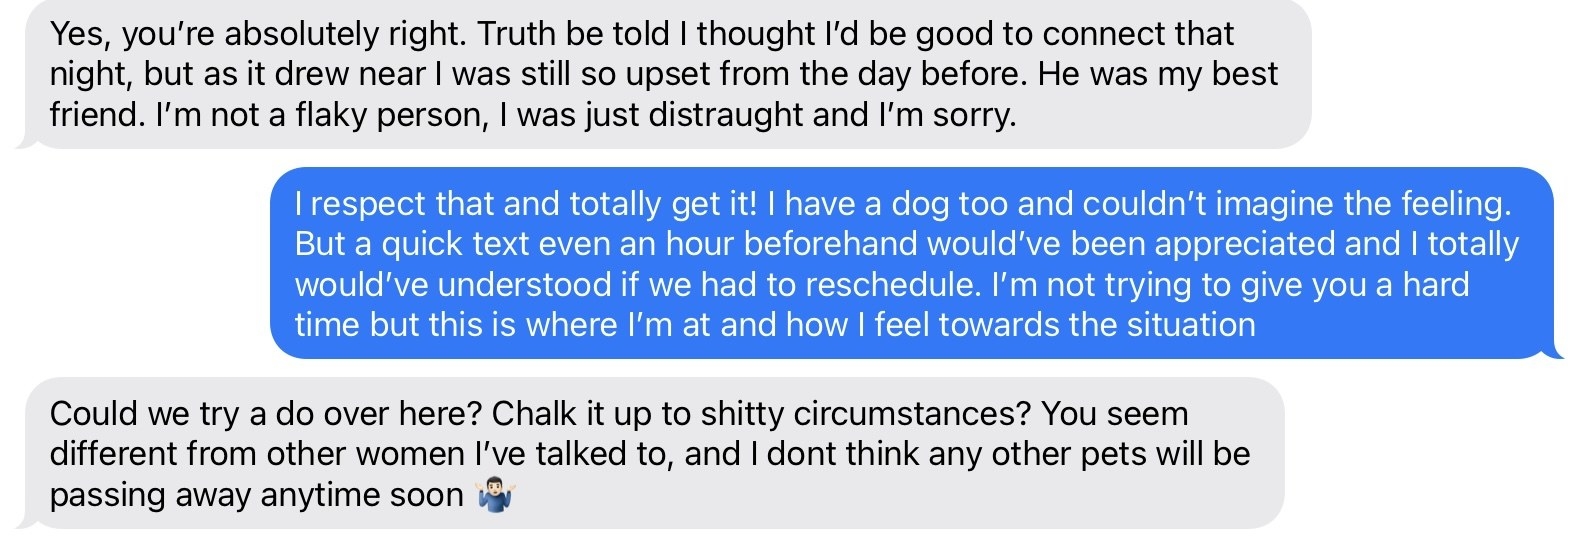 Screenshot of chat about his dog dying and that&#x27;s why he was too upset to FaceTime and her saying she understands, but &quot;a quick text even an hour beforehand would&#x27;ve been appreciated&quot;